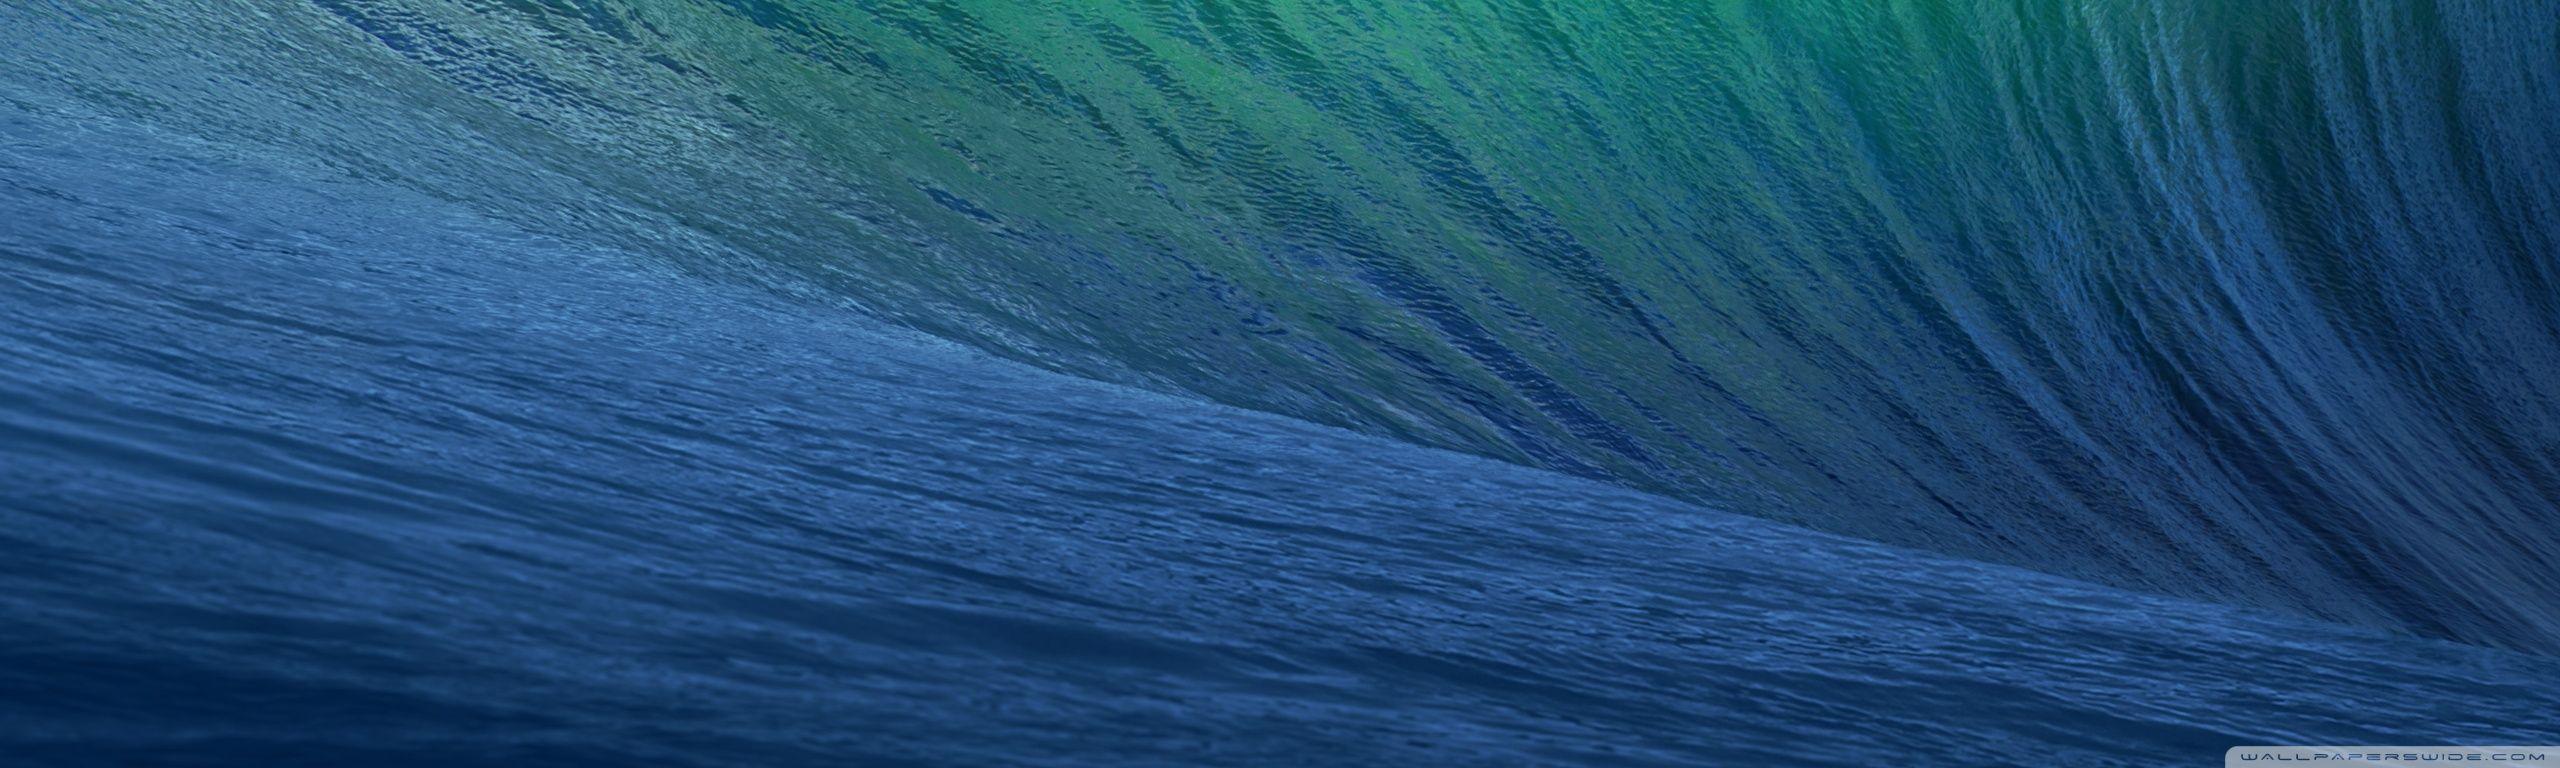 2880 1800 OS Apple Wallpapers - Top Free 2880 1800 OS Apple Backgrounds ...